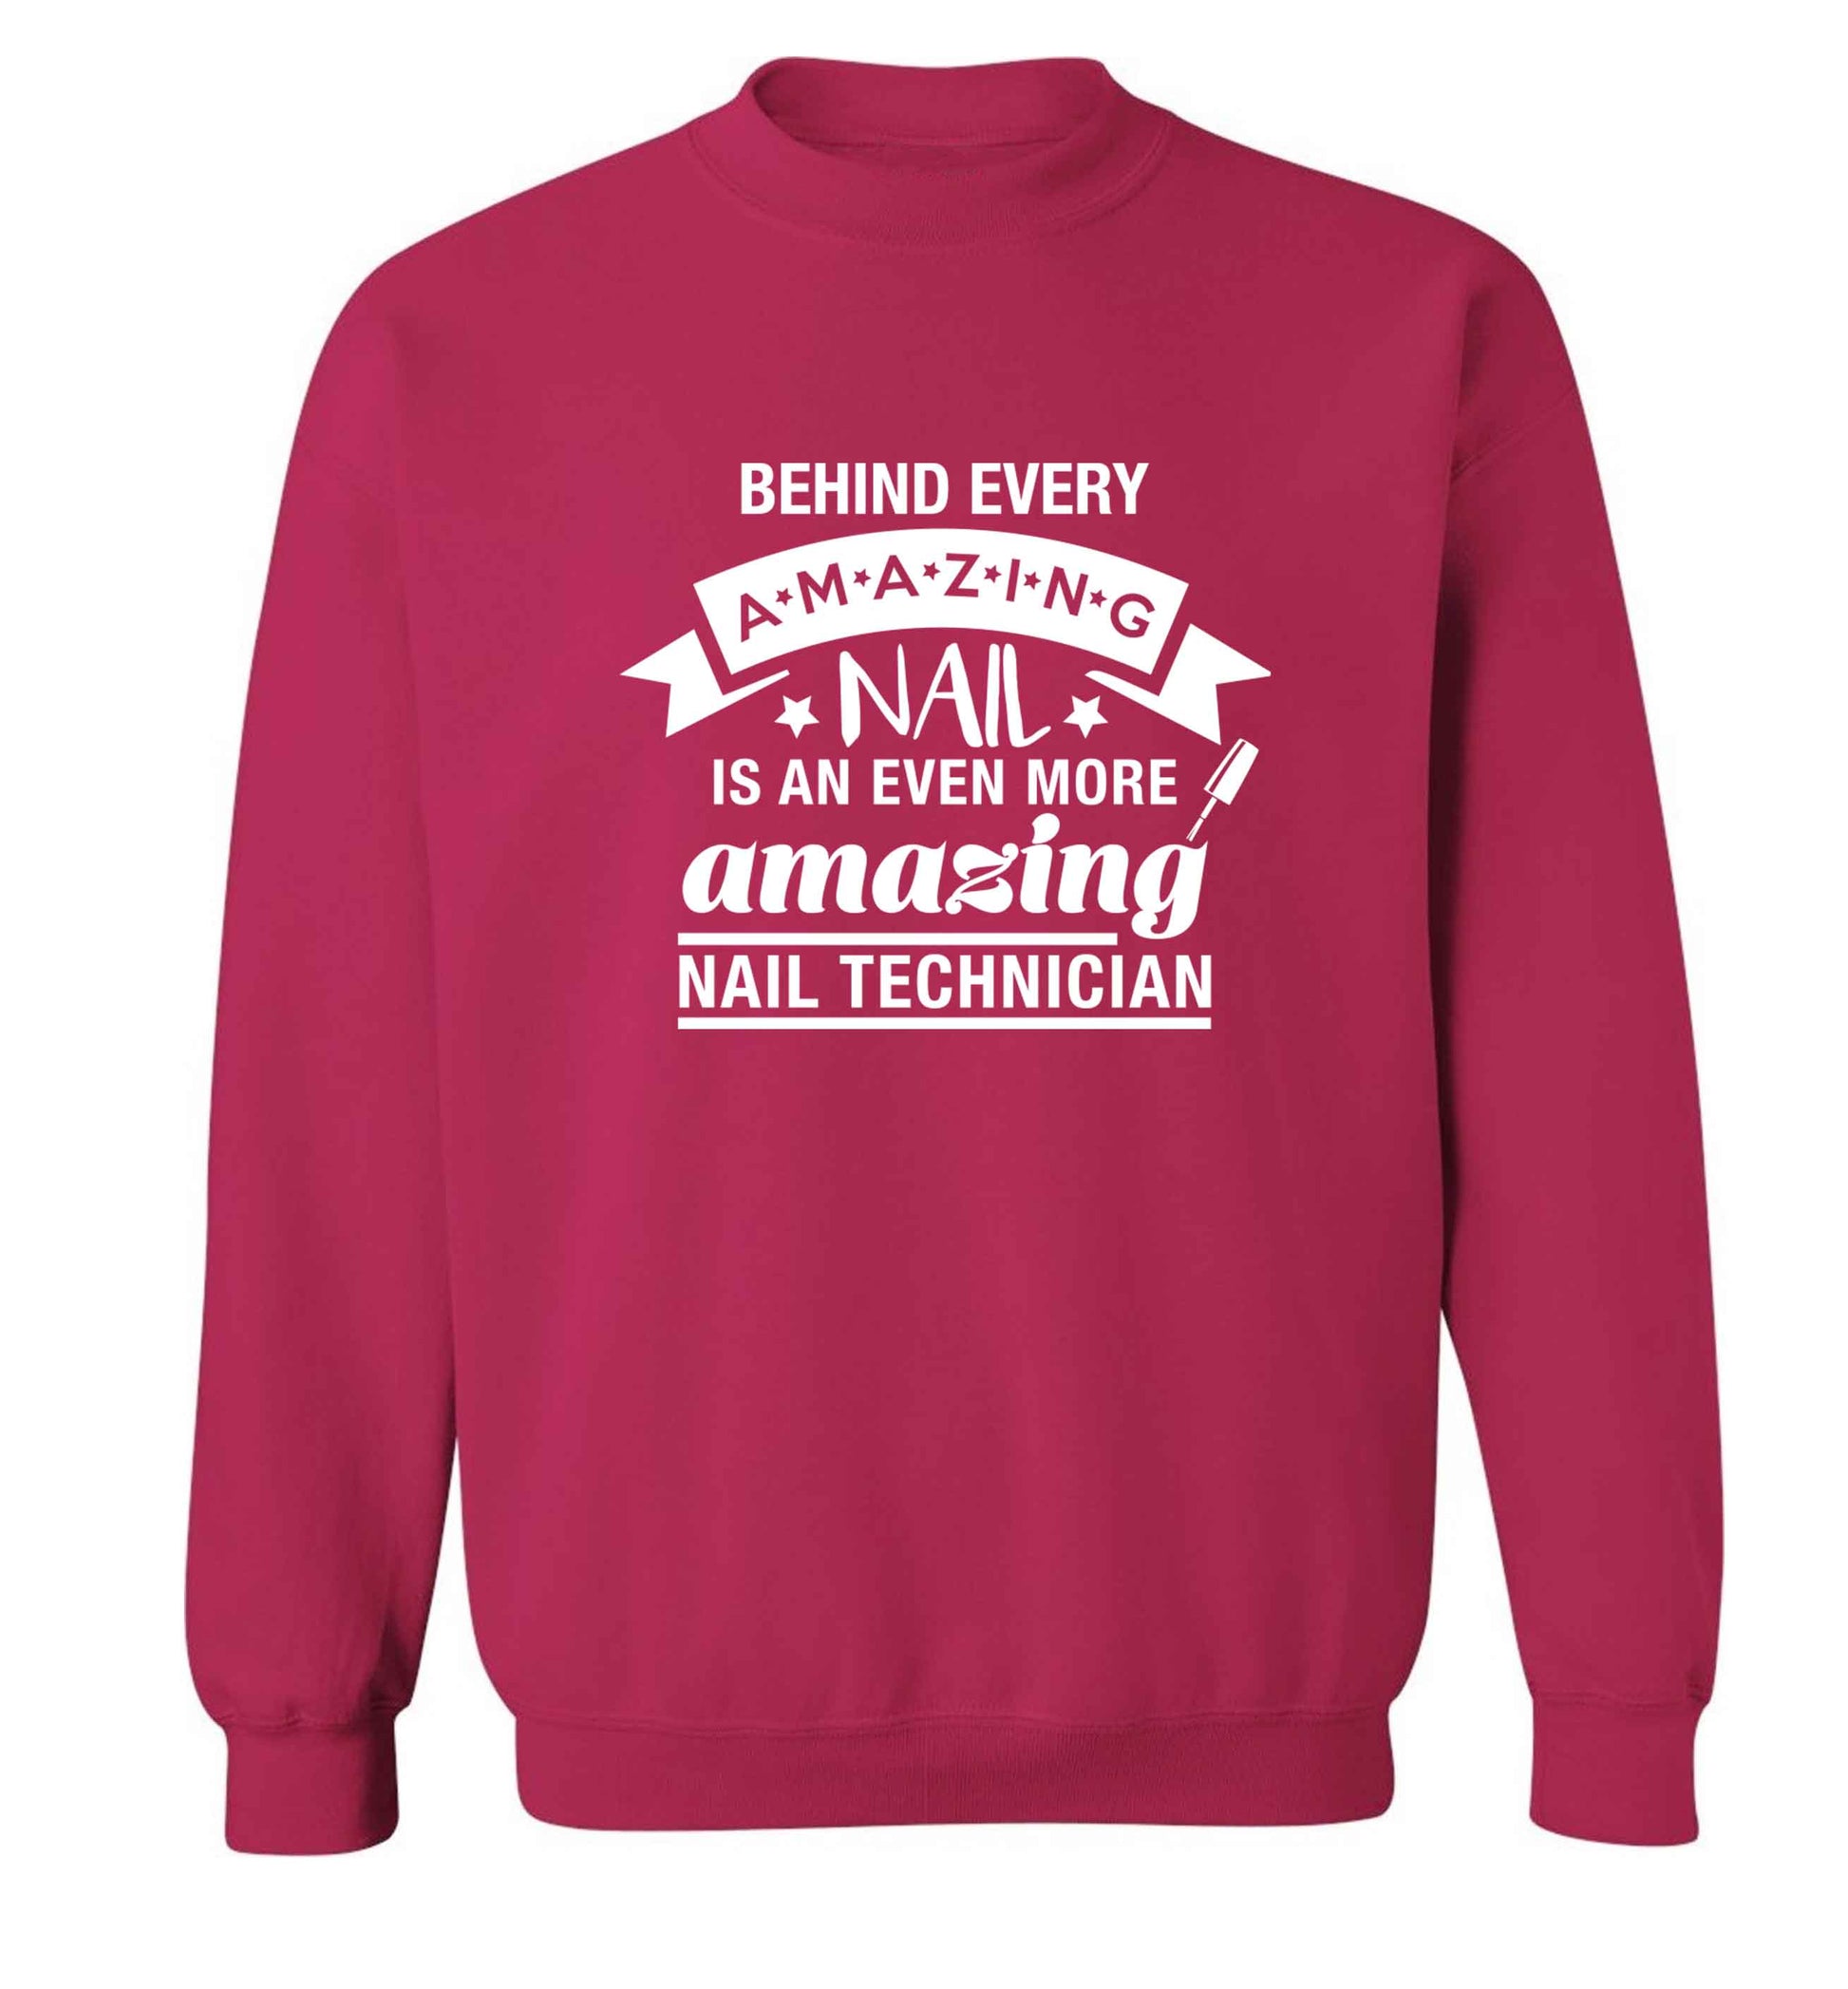 Behind every amazing nail is an even more amazing nail technician adult's unisex pink sweater 2XL